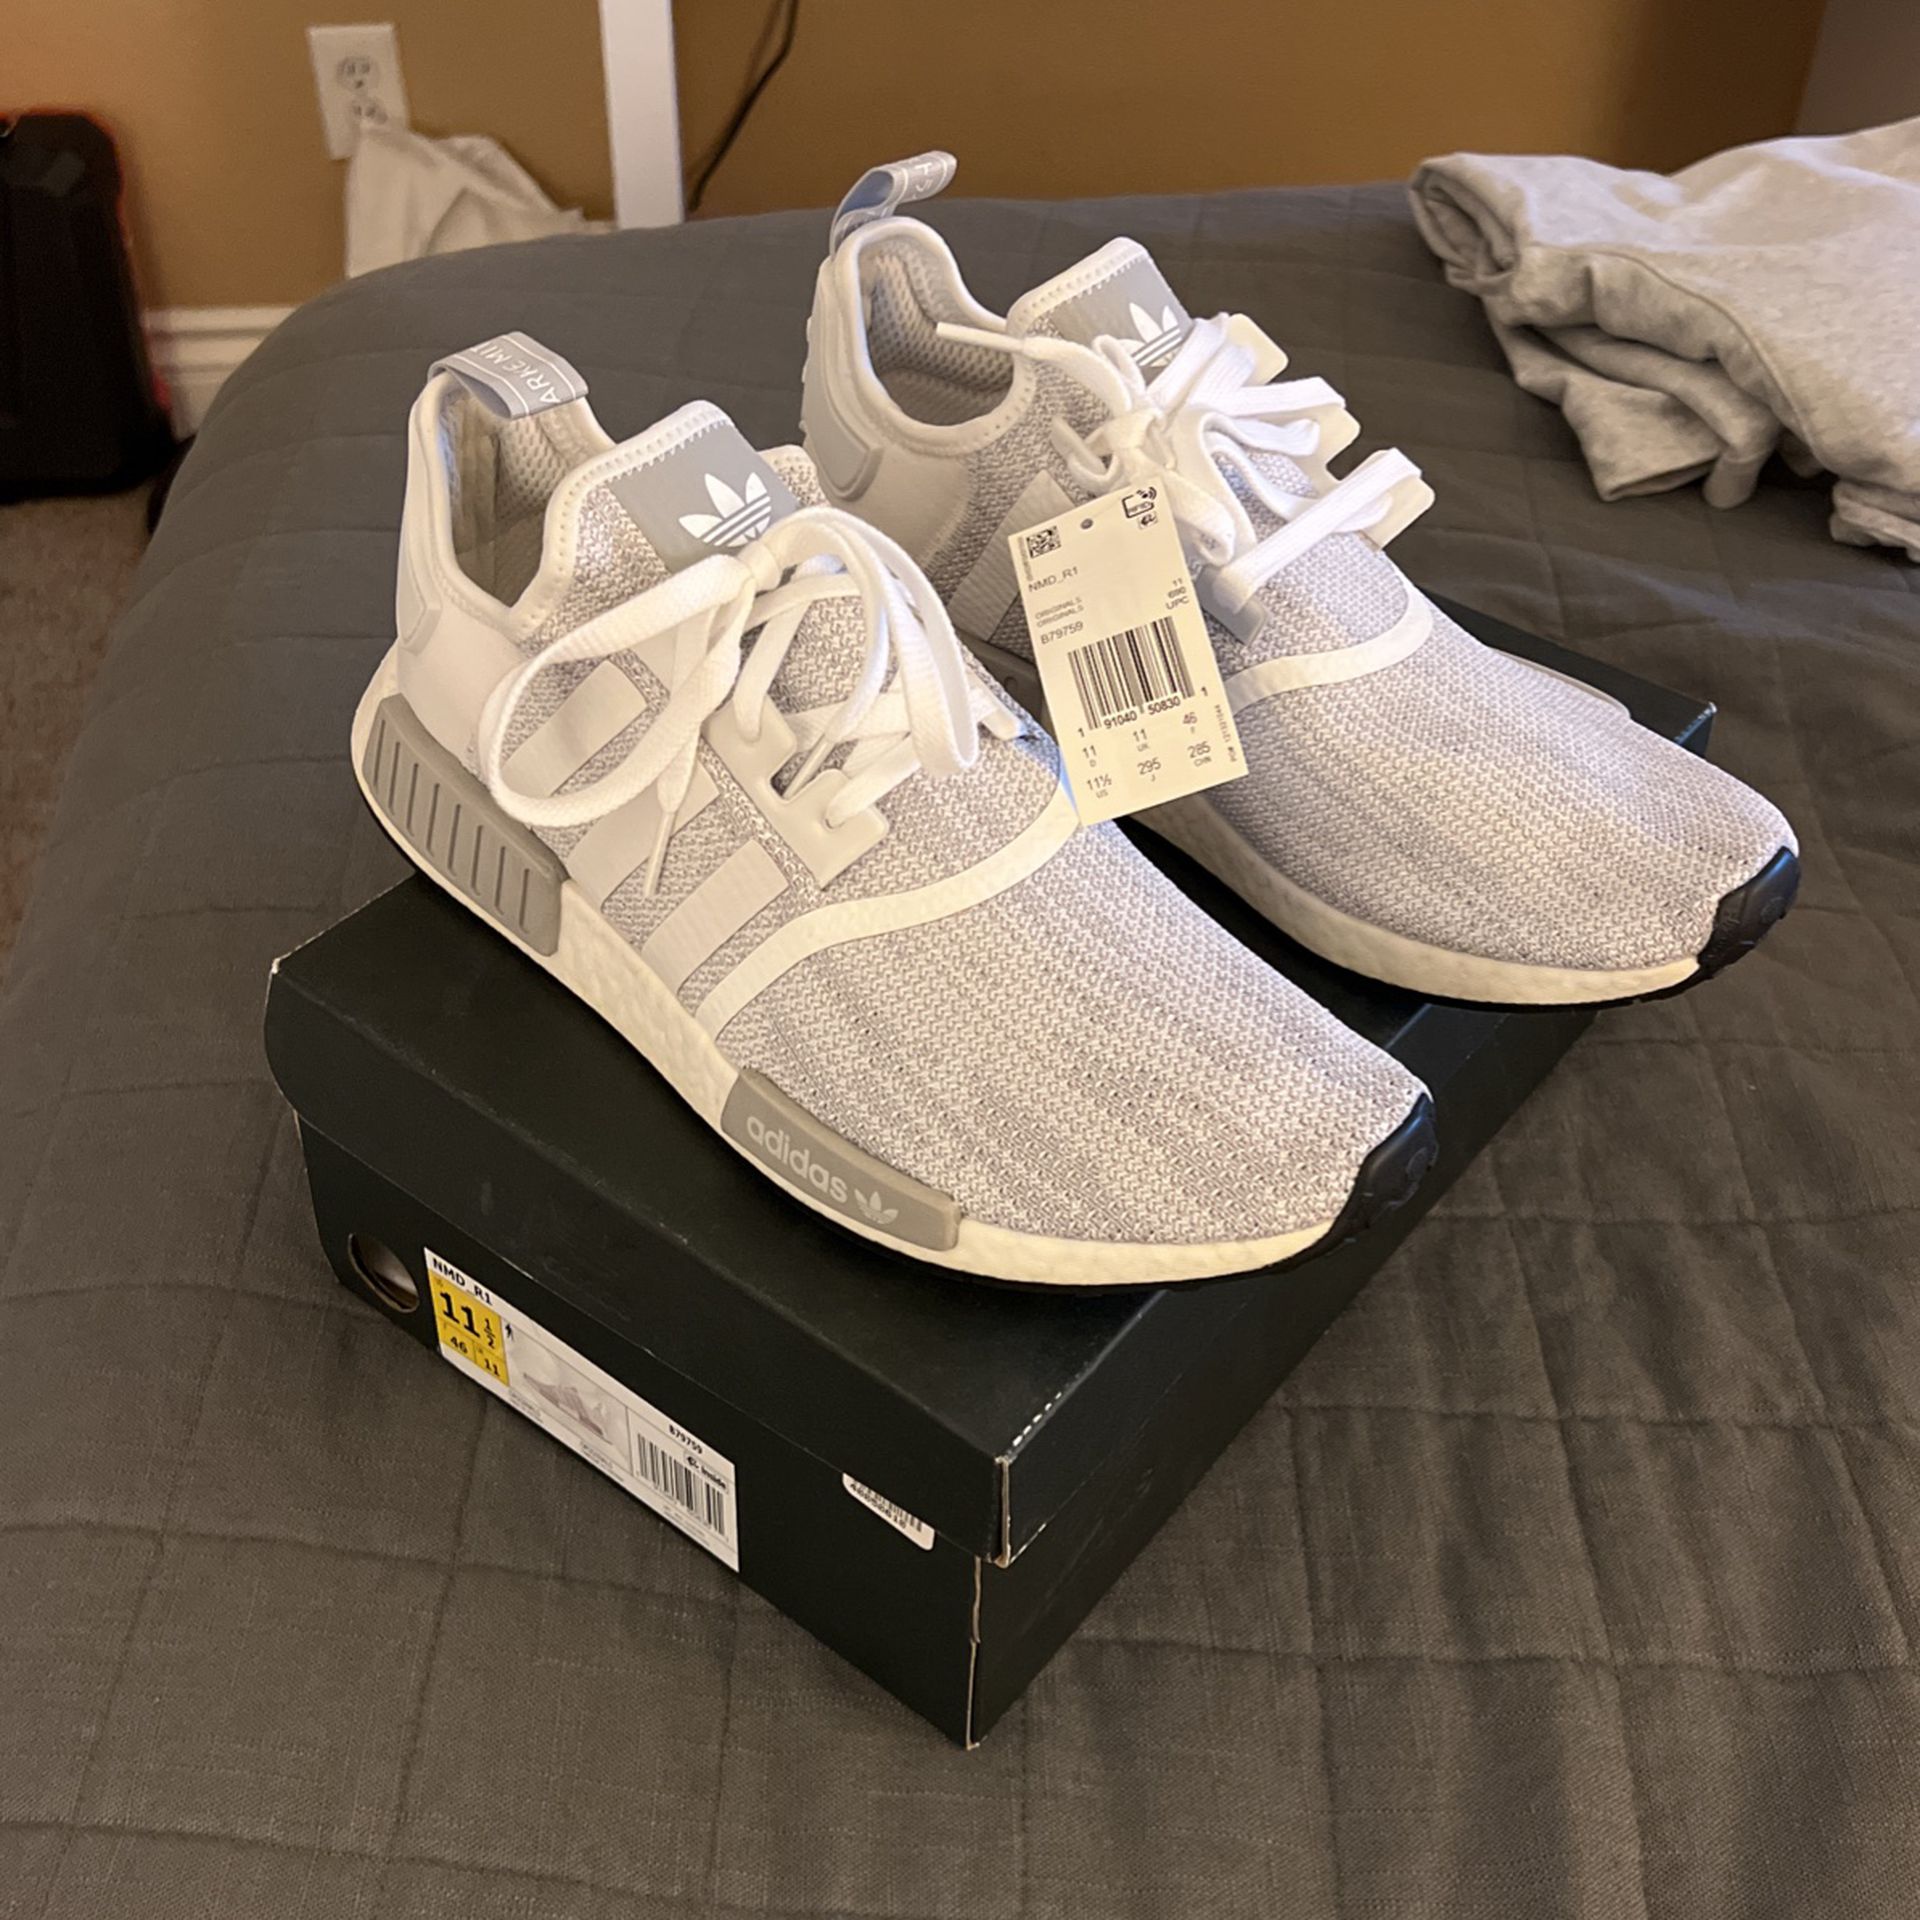 flyde padle mount Adidas NMD R1 “Blizzard” 11.5 BRAND NEW for Sale in Rancho Cucamonga, CA -  OfferUp